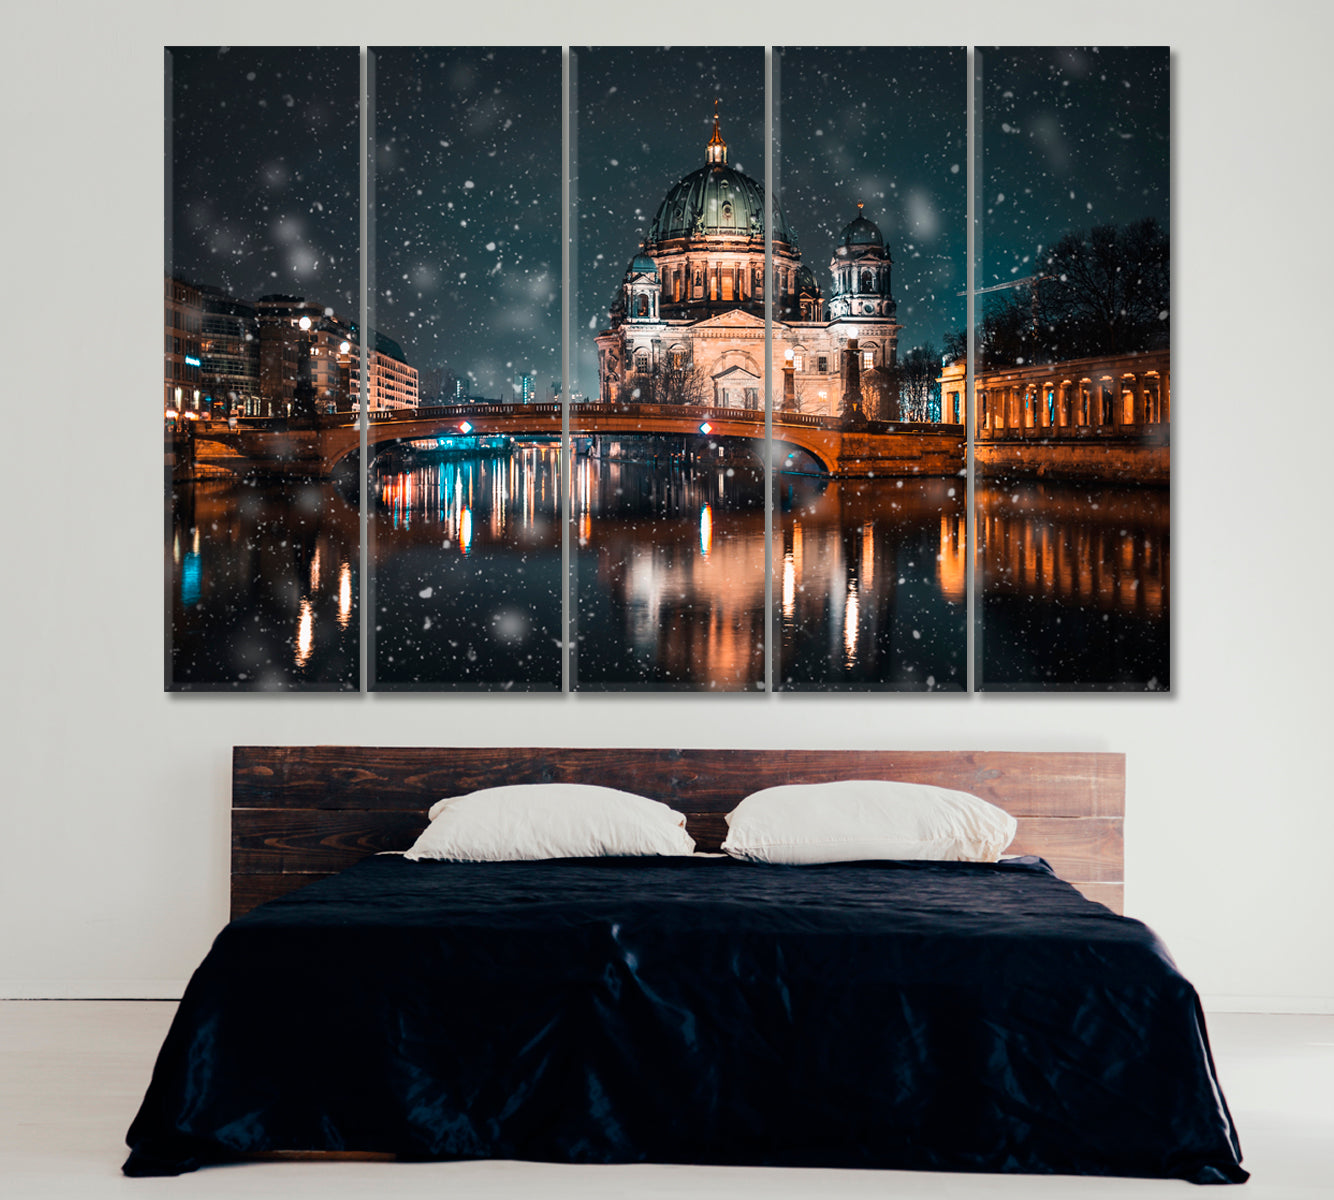 Berlin Cathedral on Spree River Canvas Print ArtLexy 5 Panels 36"x24" inches 